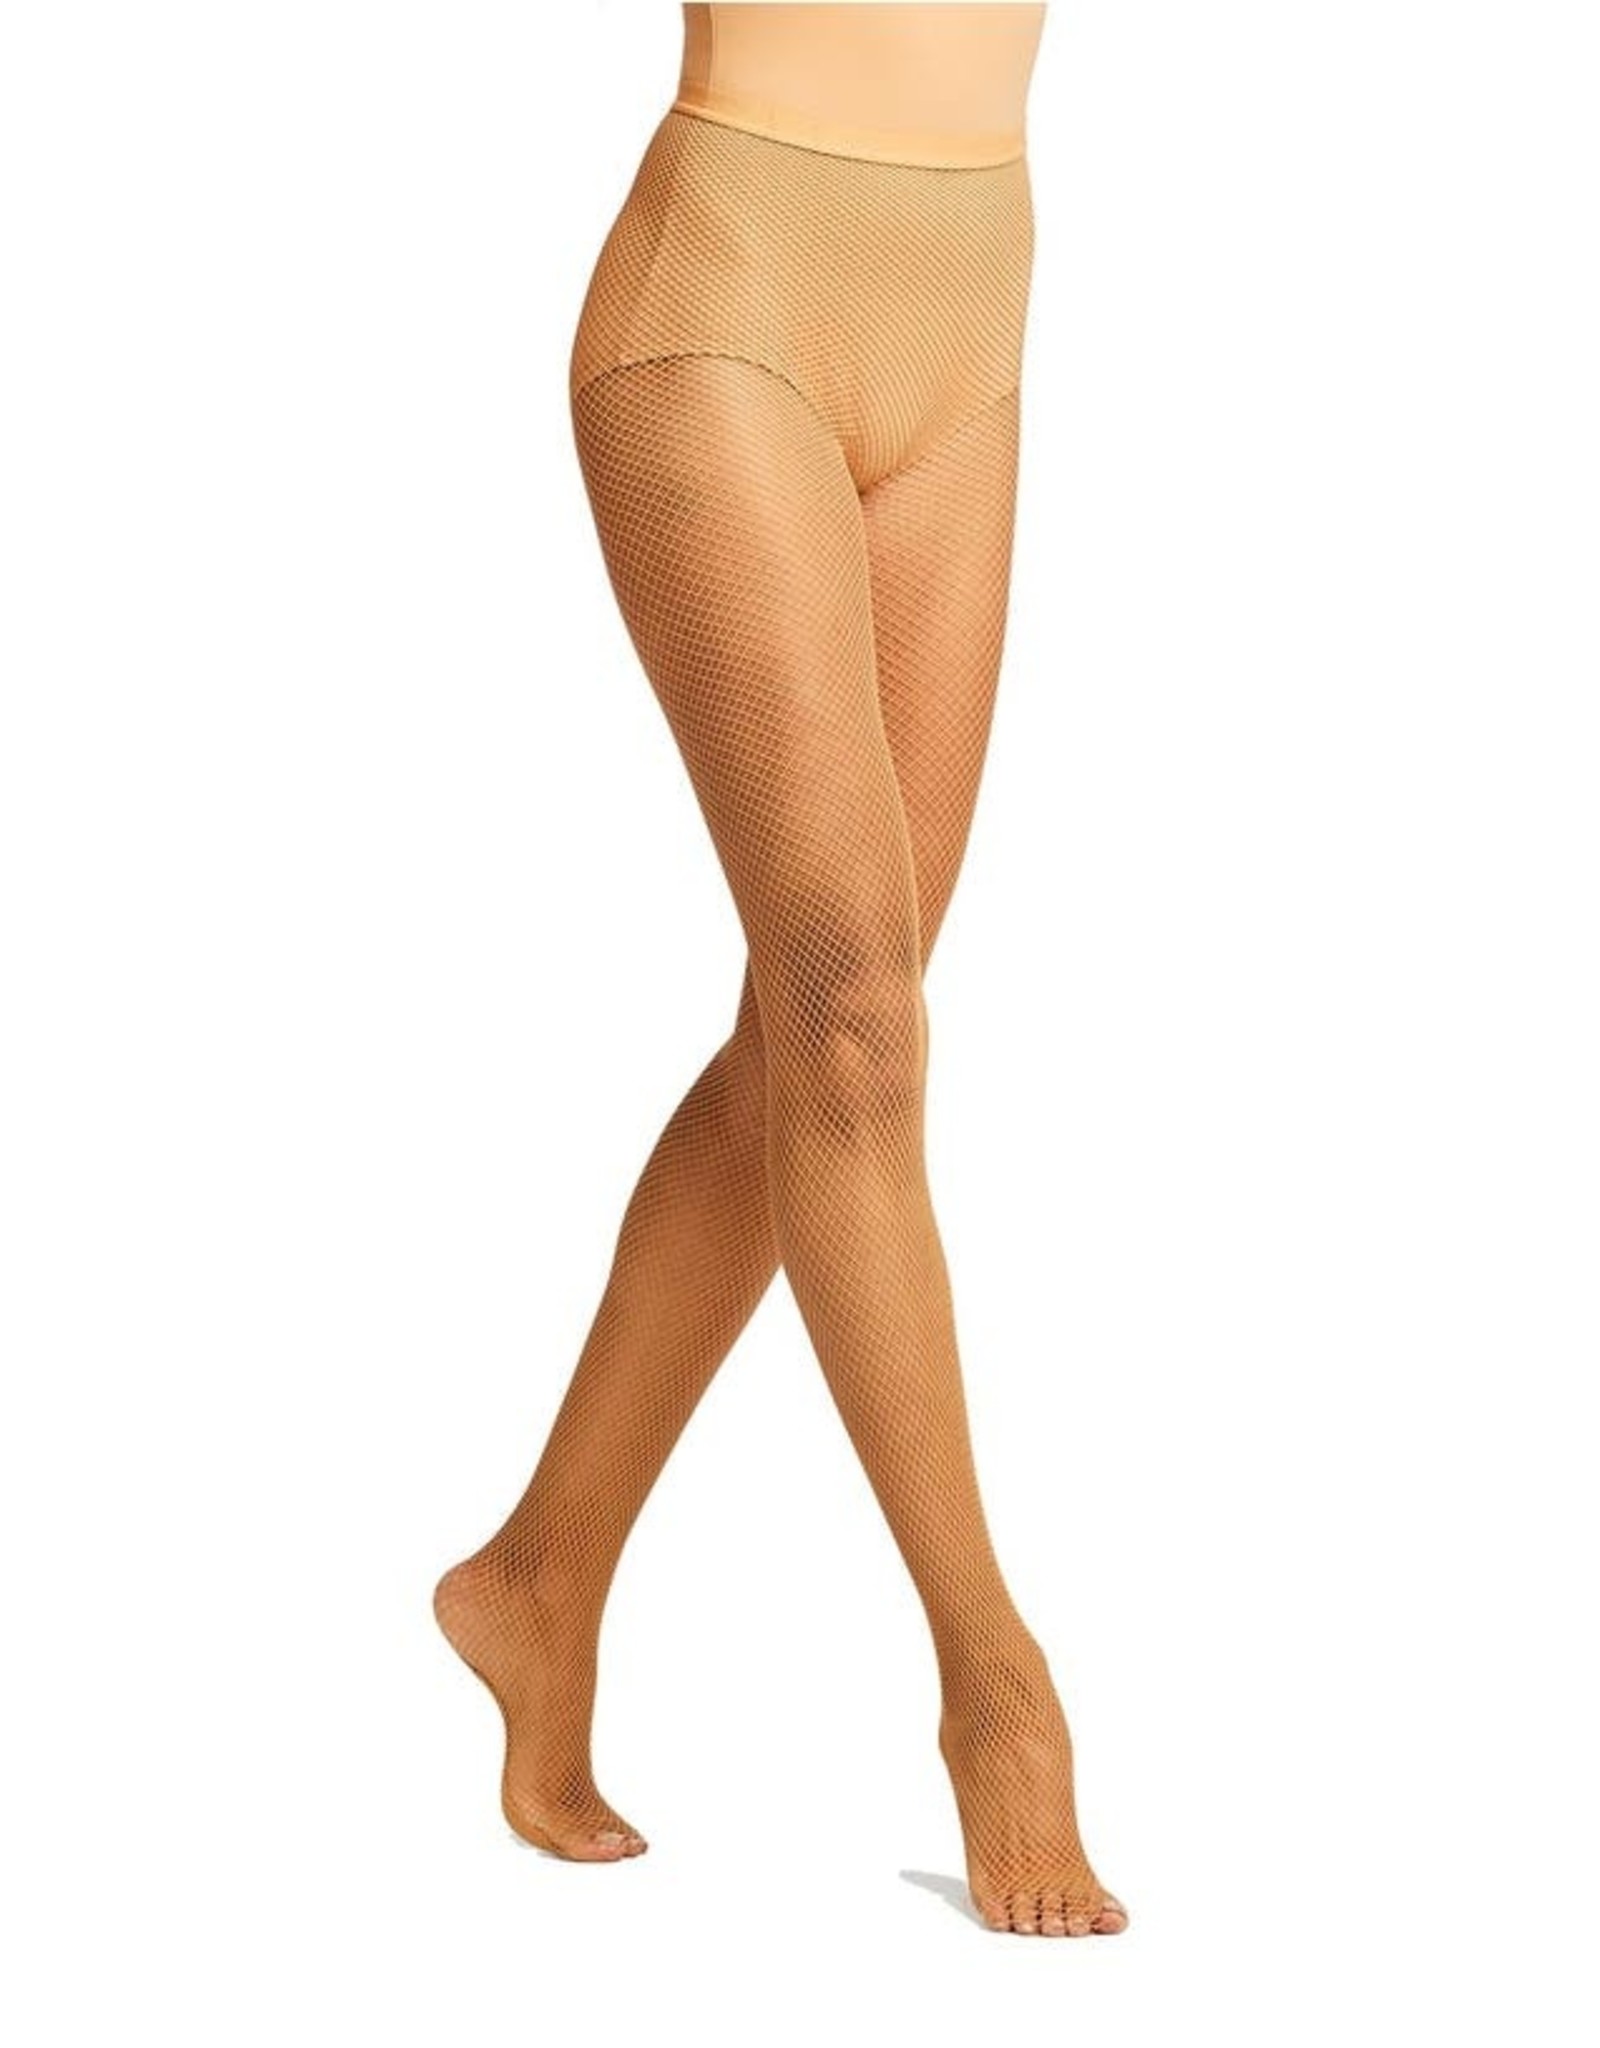 Capezio / Bunheads Professional Seamless Fishnet Footed Tights (3000)